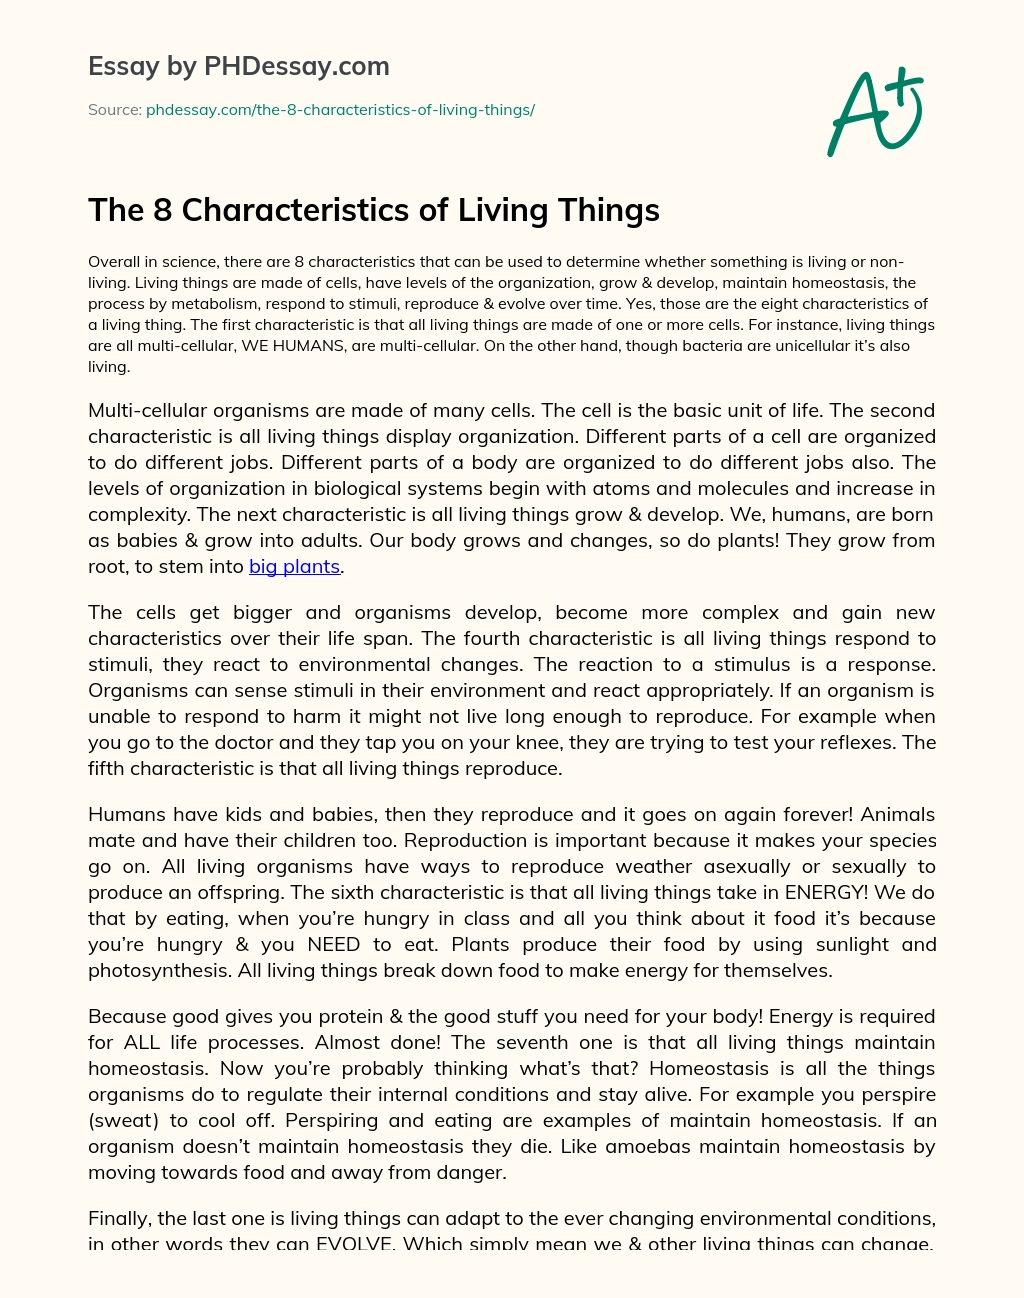 The 8 Characteristics Of Living Things Phdessay Com